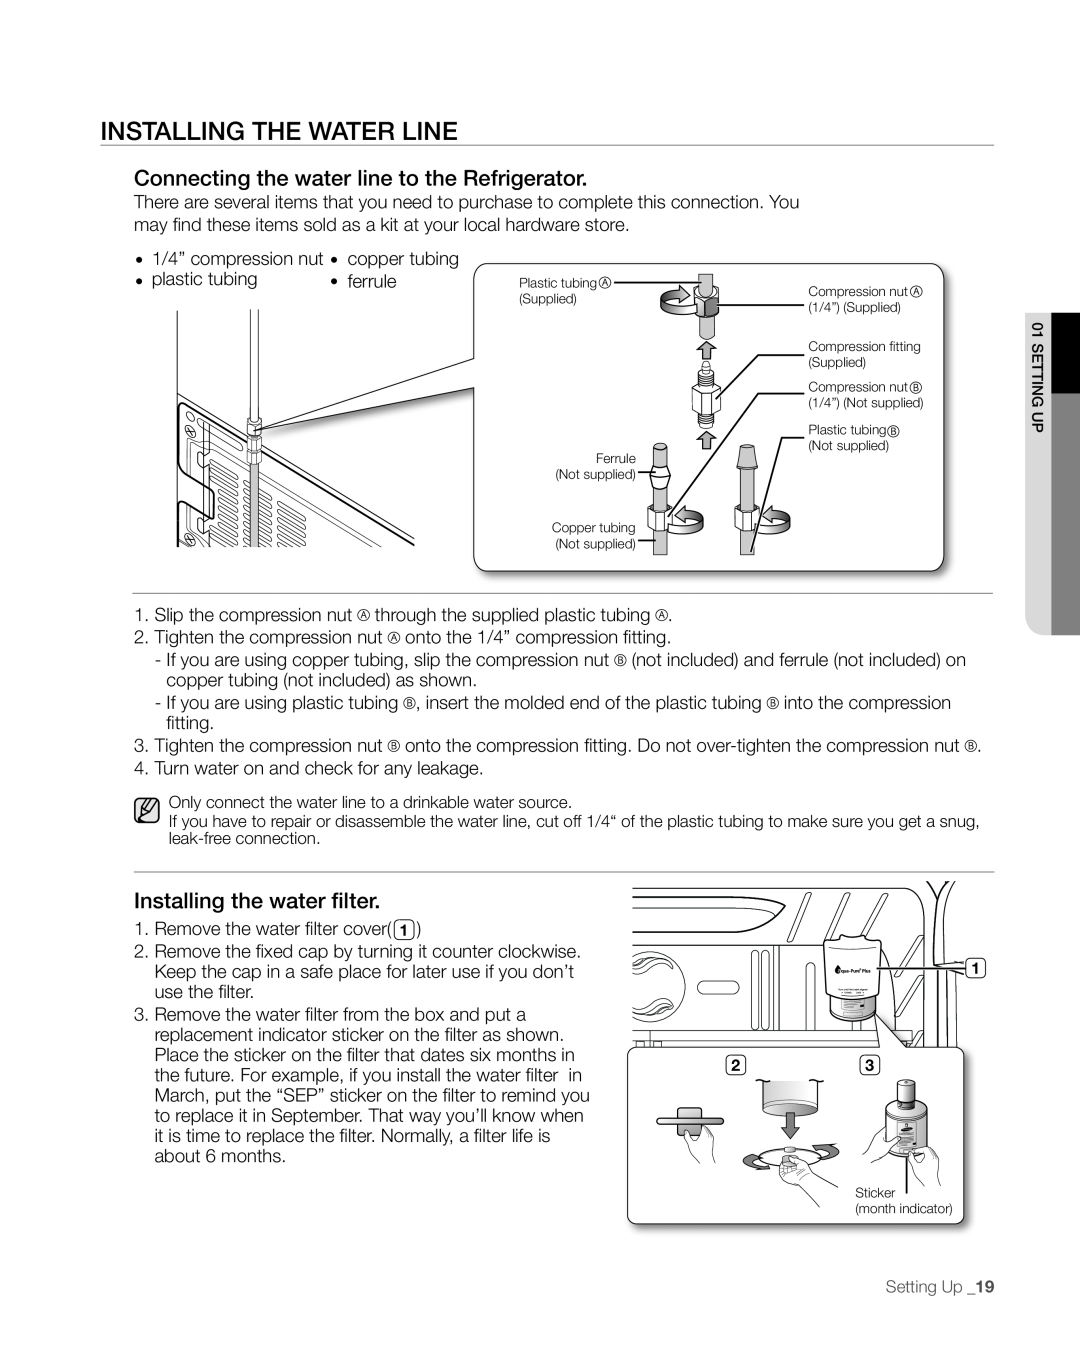 Sears RFG297AA manual Installing The Water Line, Connecting the water line to the Refrigerator, Installing the water filter 